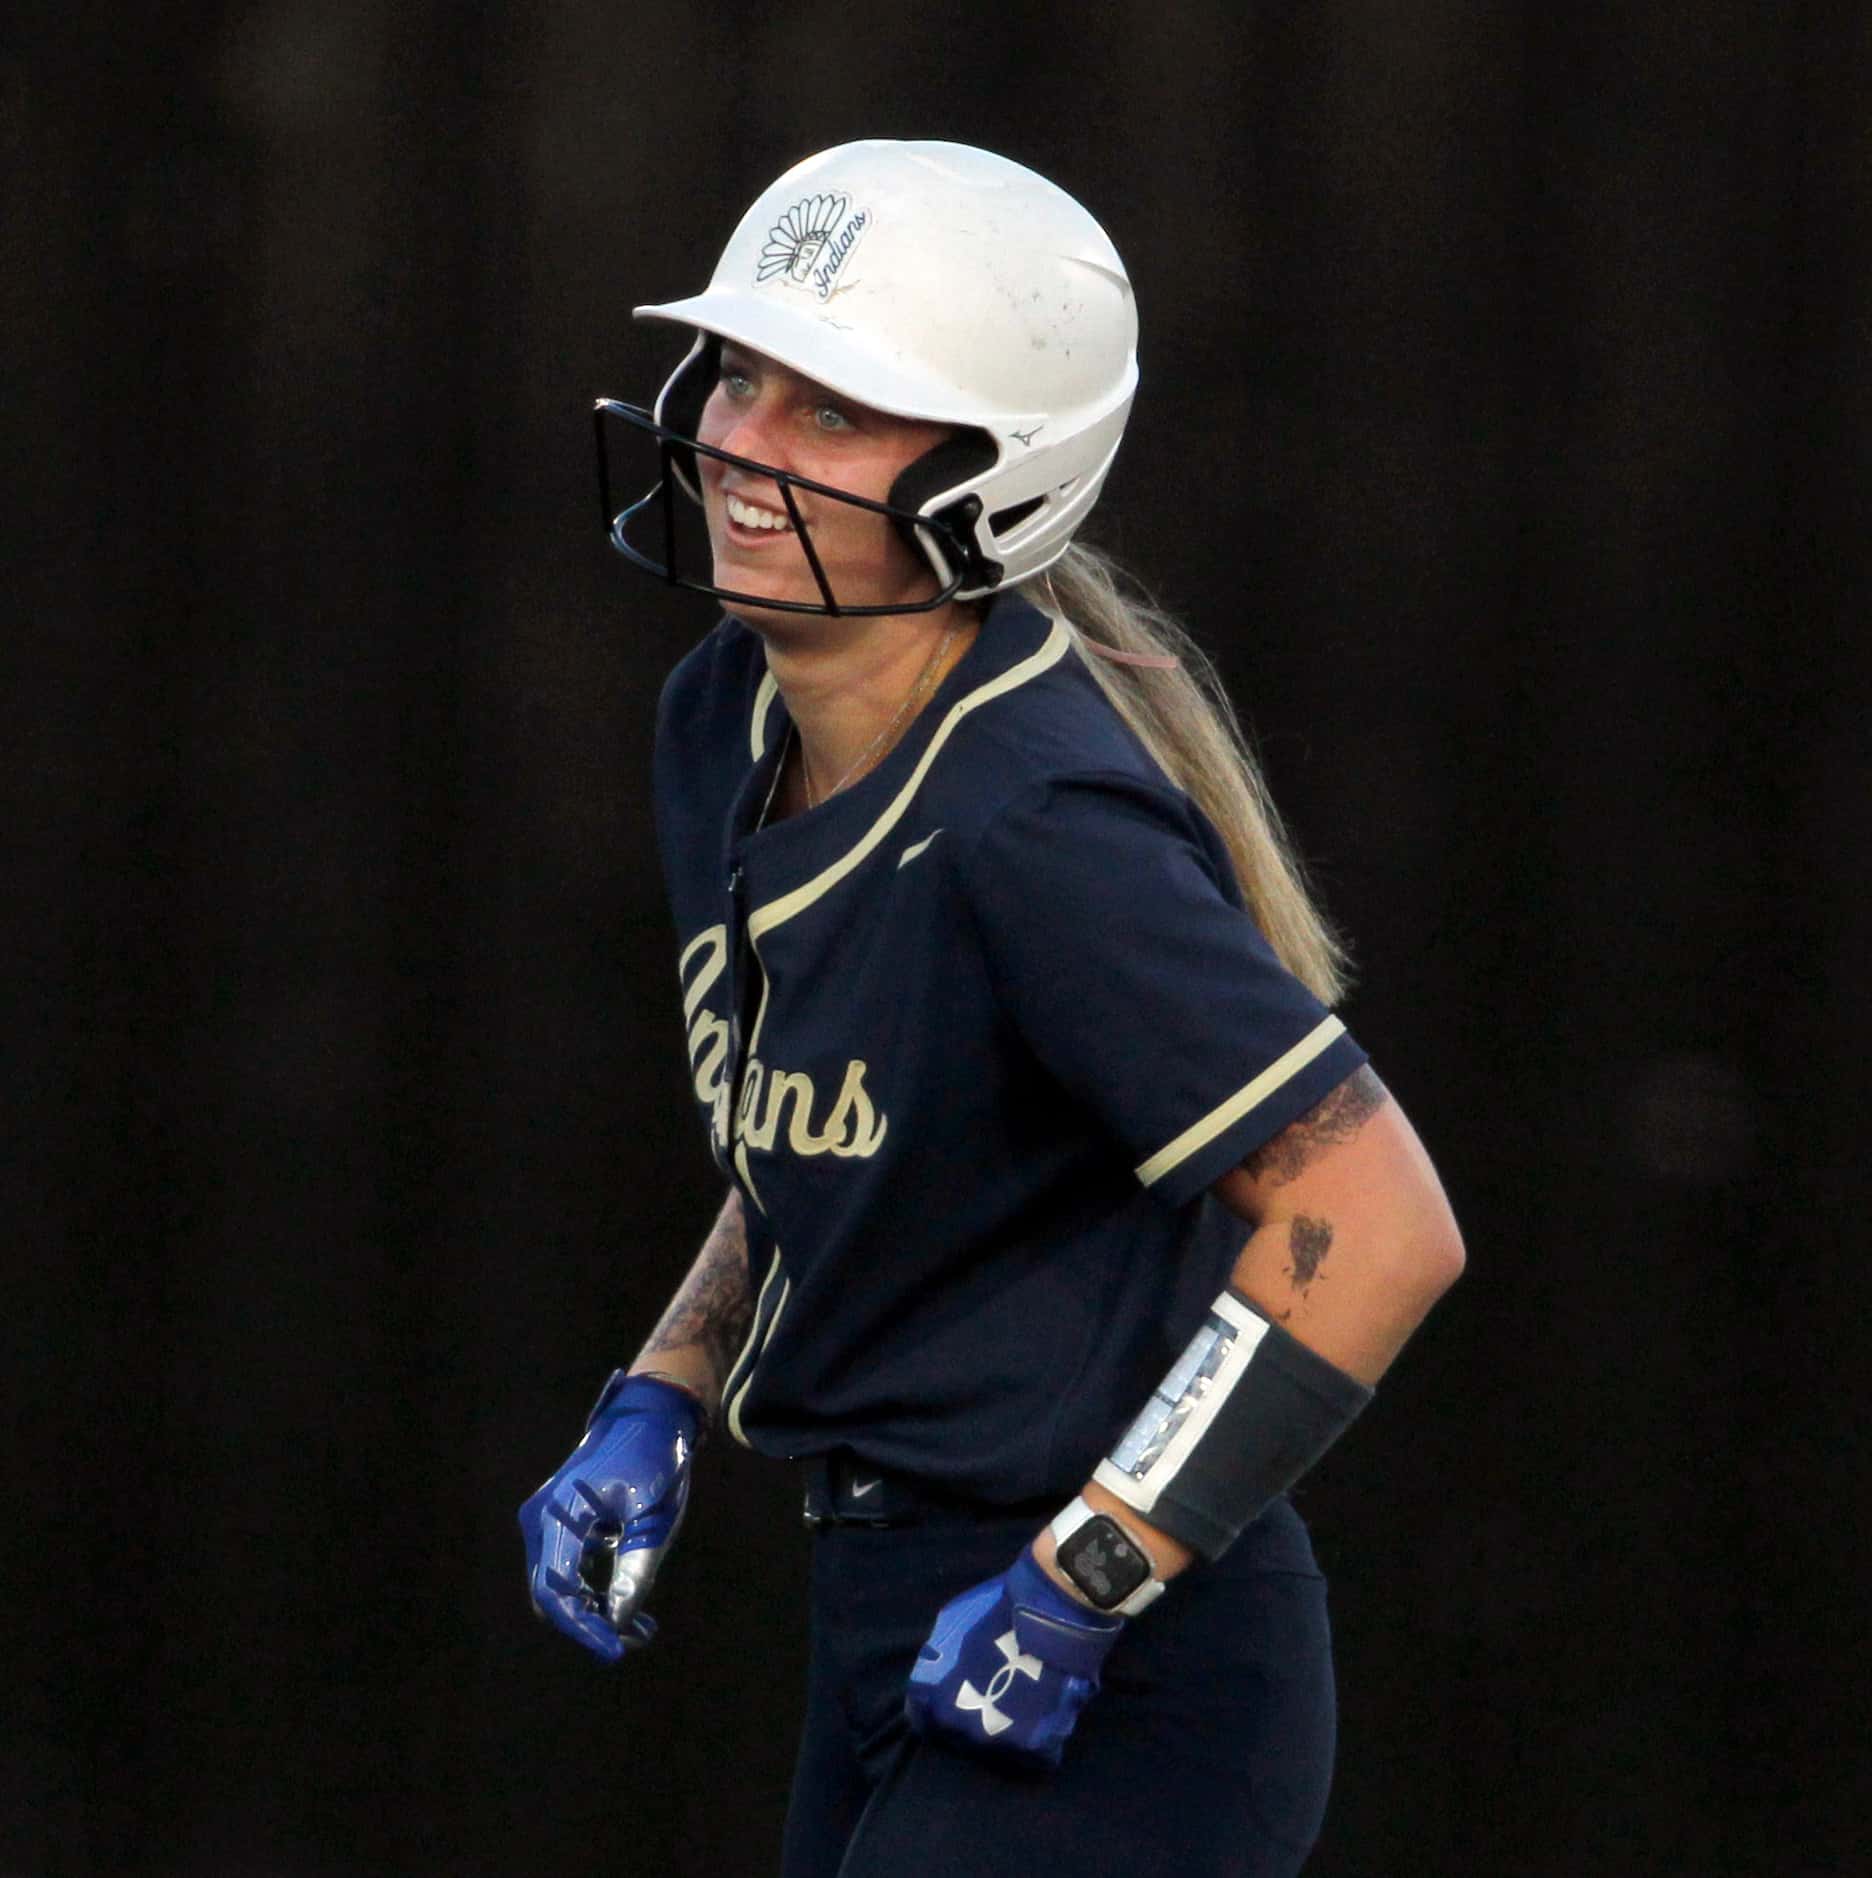 Keller first baseman Carley Genzer (15) sports a smile after hitting an RBI double during...